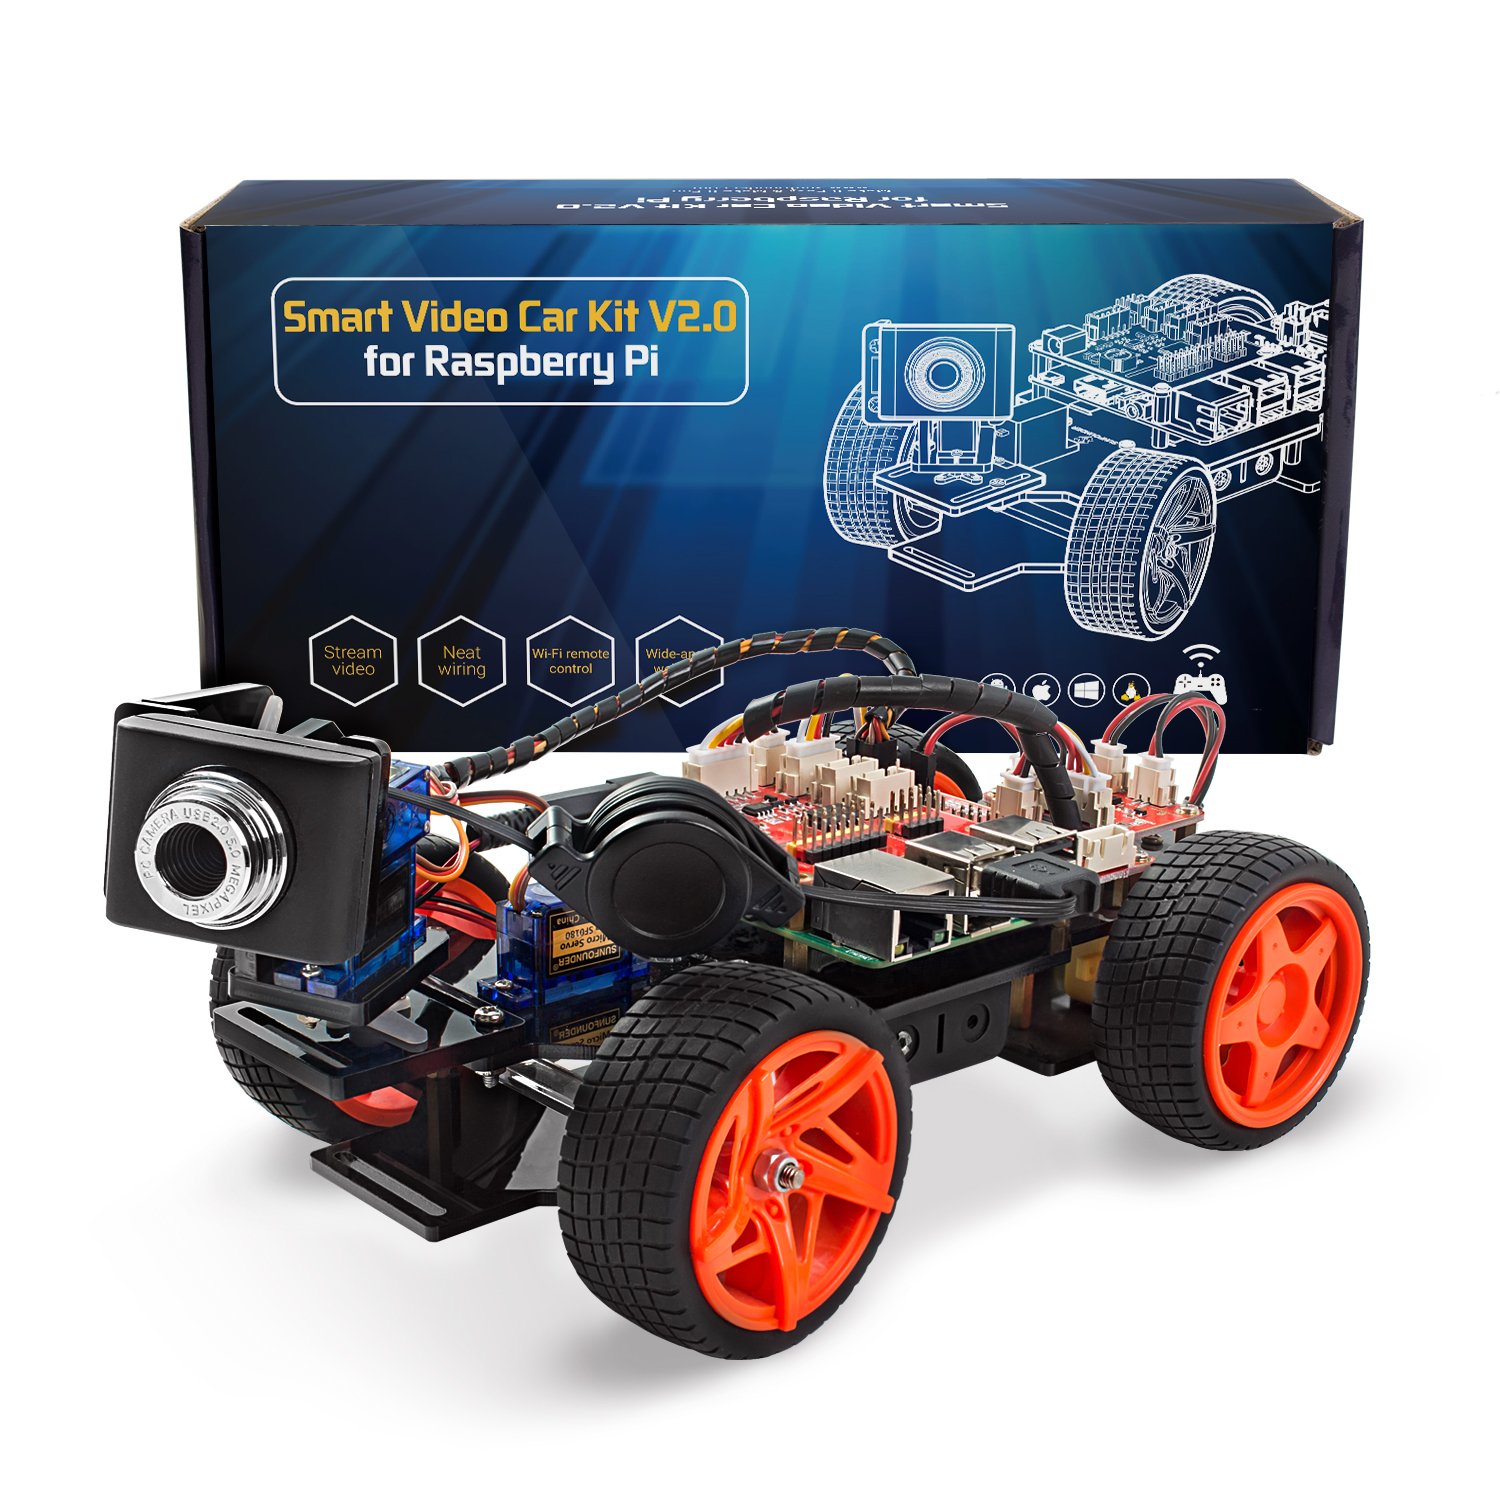 Buy SunFounder Raspberry Pi Smart Video Car Kit V2.0 Block Based Graphical Visual Programming Language Remote Control by UI on Windows Mac and Web Browser Electronic Toy with Detail Manual